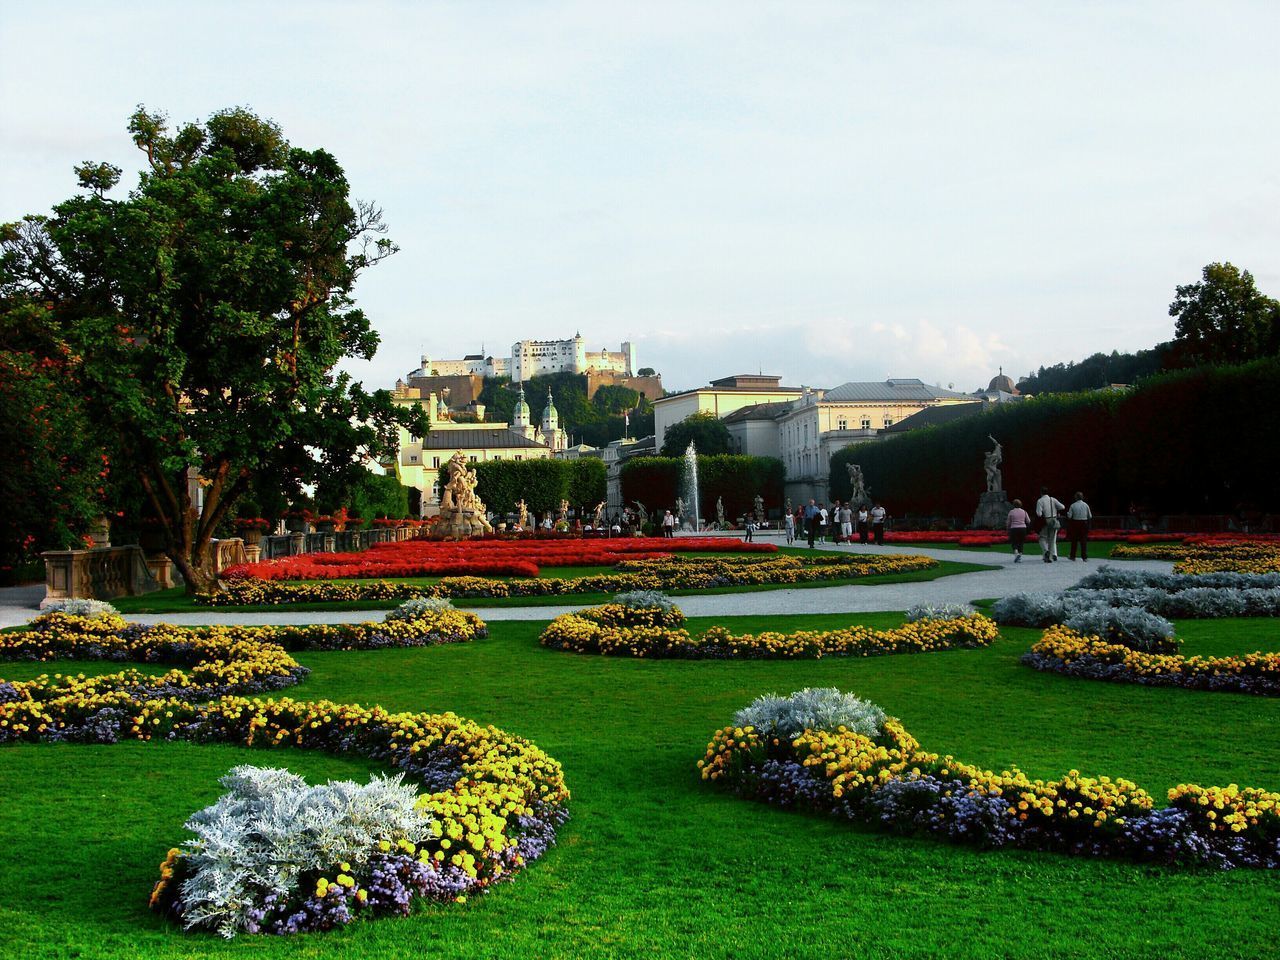 SCENIC VIEW OF PARK